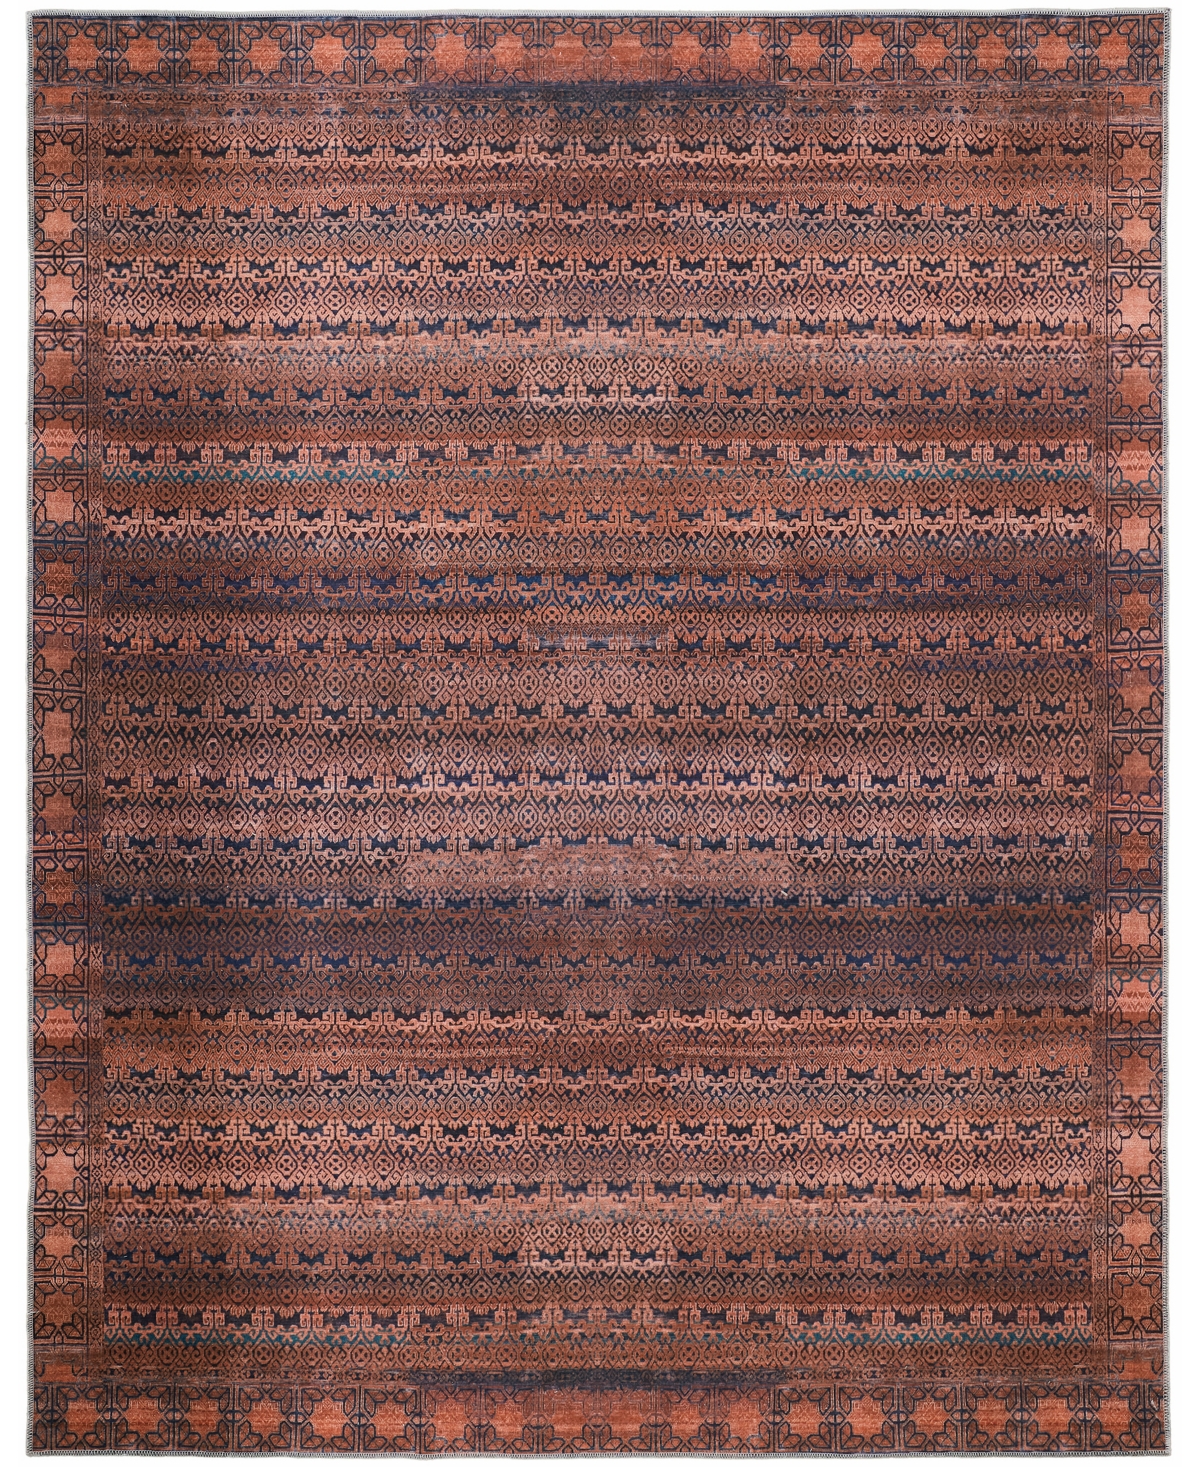 Simply Woven Voss F39h4 3'11" X 6' Area Rug In Tan,blue